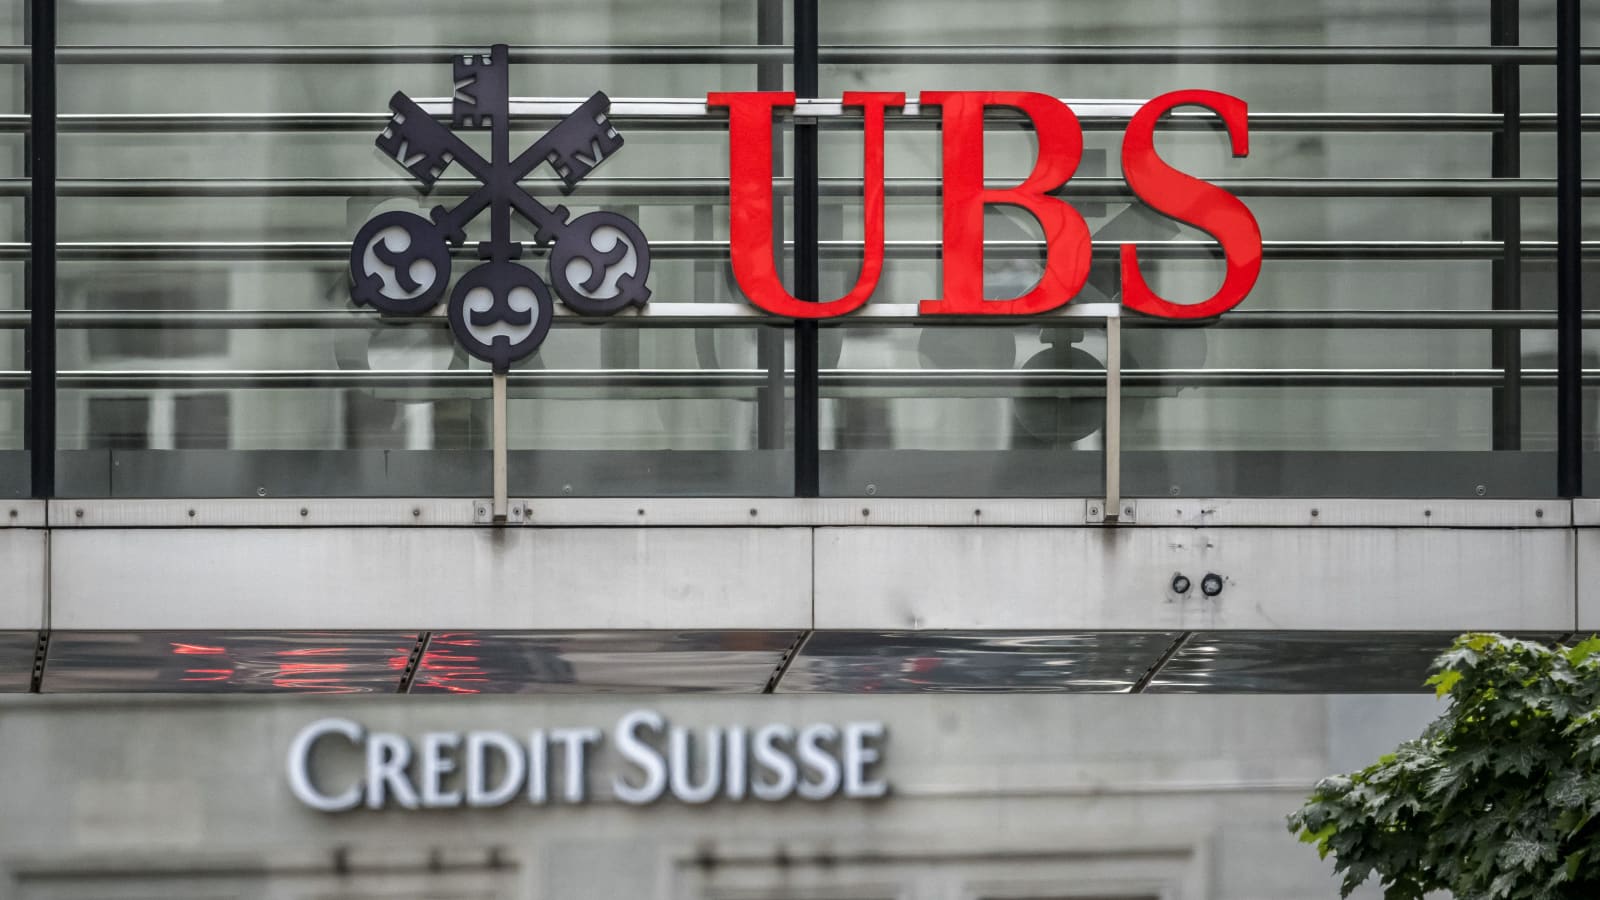 UBS Jumps Back In: Selling Controversial Bonds Amid Credit Suisse Drama